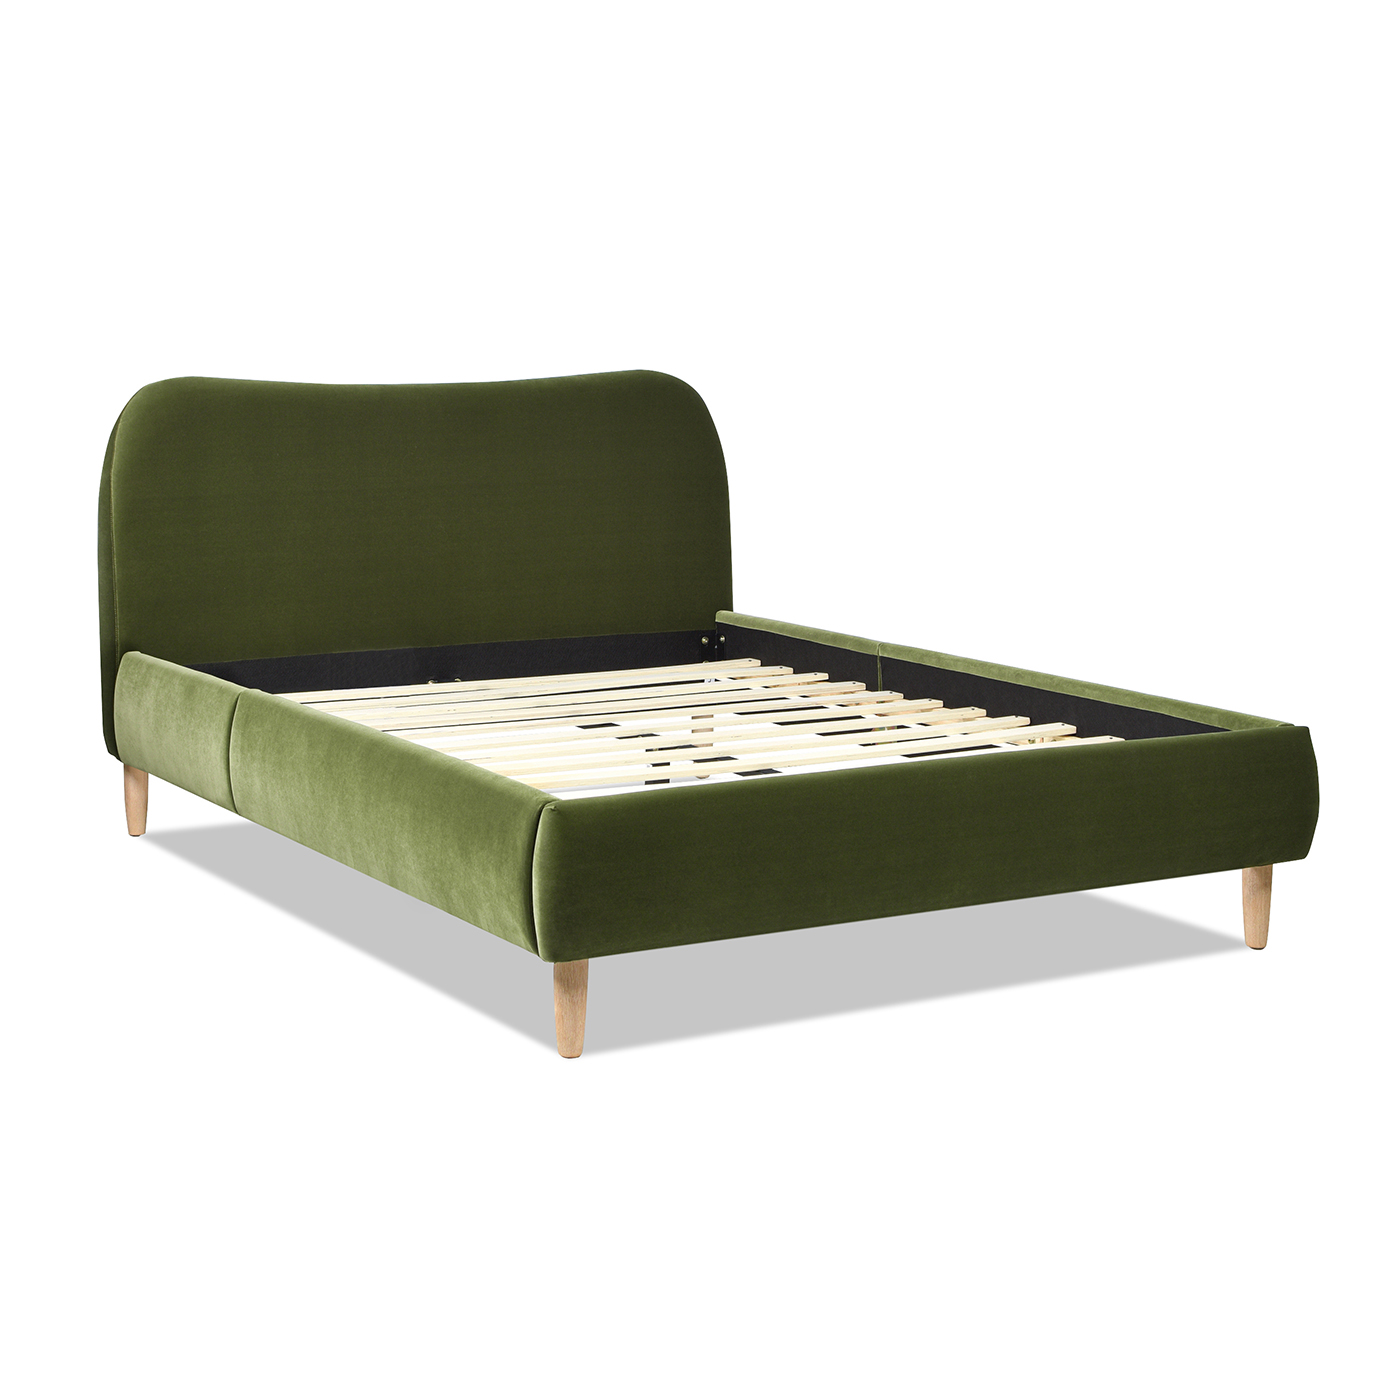 Roman Curved Headboard Upholstered Platform Bed, Queen, Olive Green